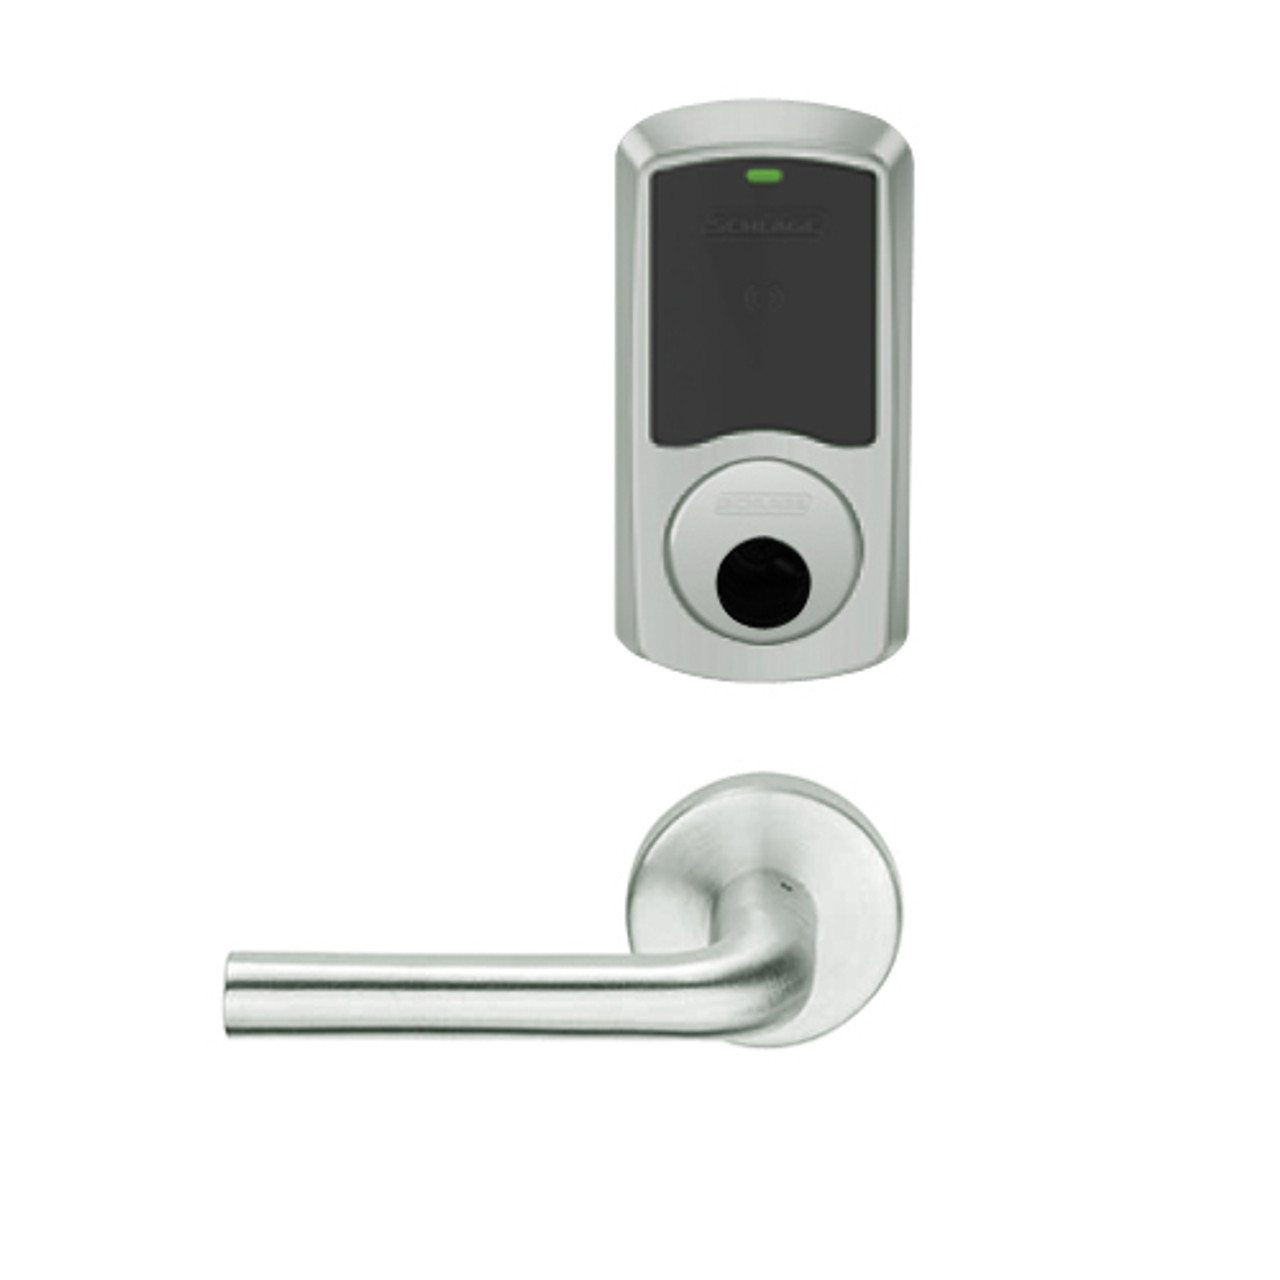 LEMB-GRW-L-02-619-00A Schlage Less Cylinder Privacy/Office Wireless Greenwich Mortise Lock with Push Button & LED Indicator and 02 Lever in Satin Nickel